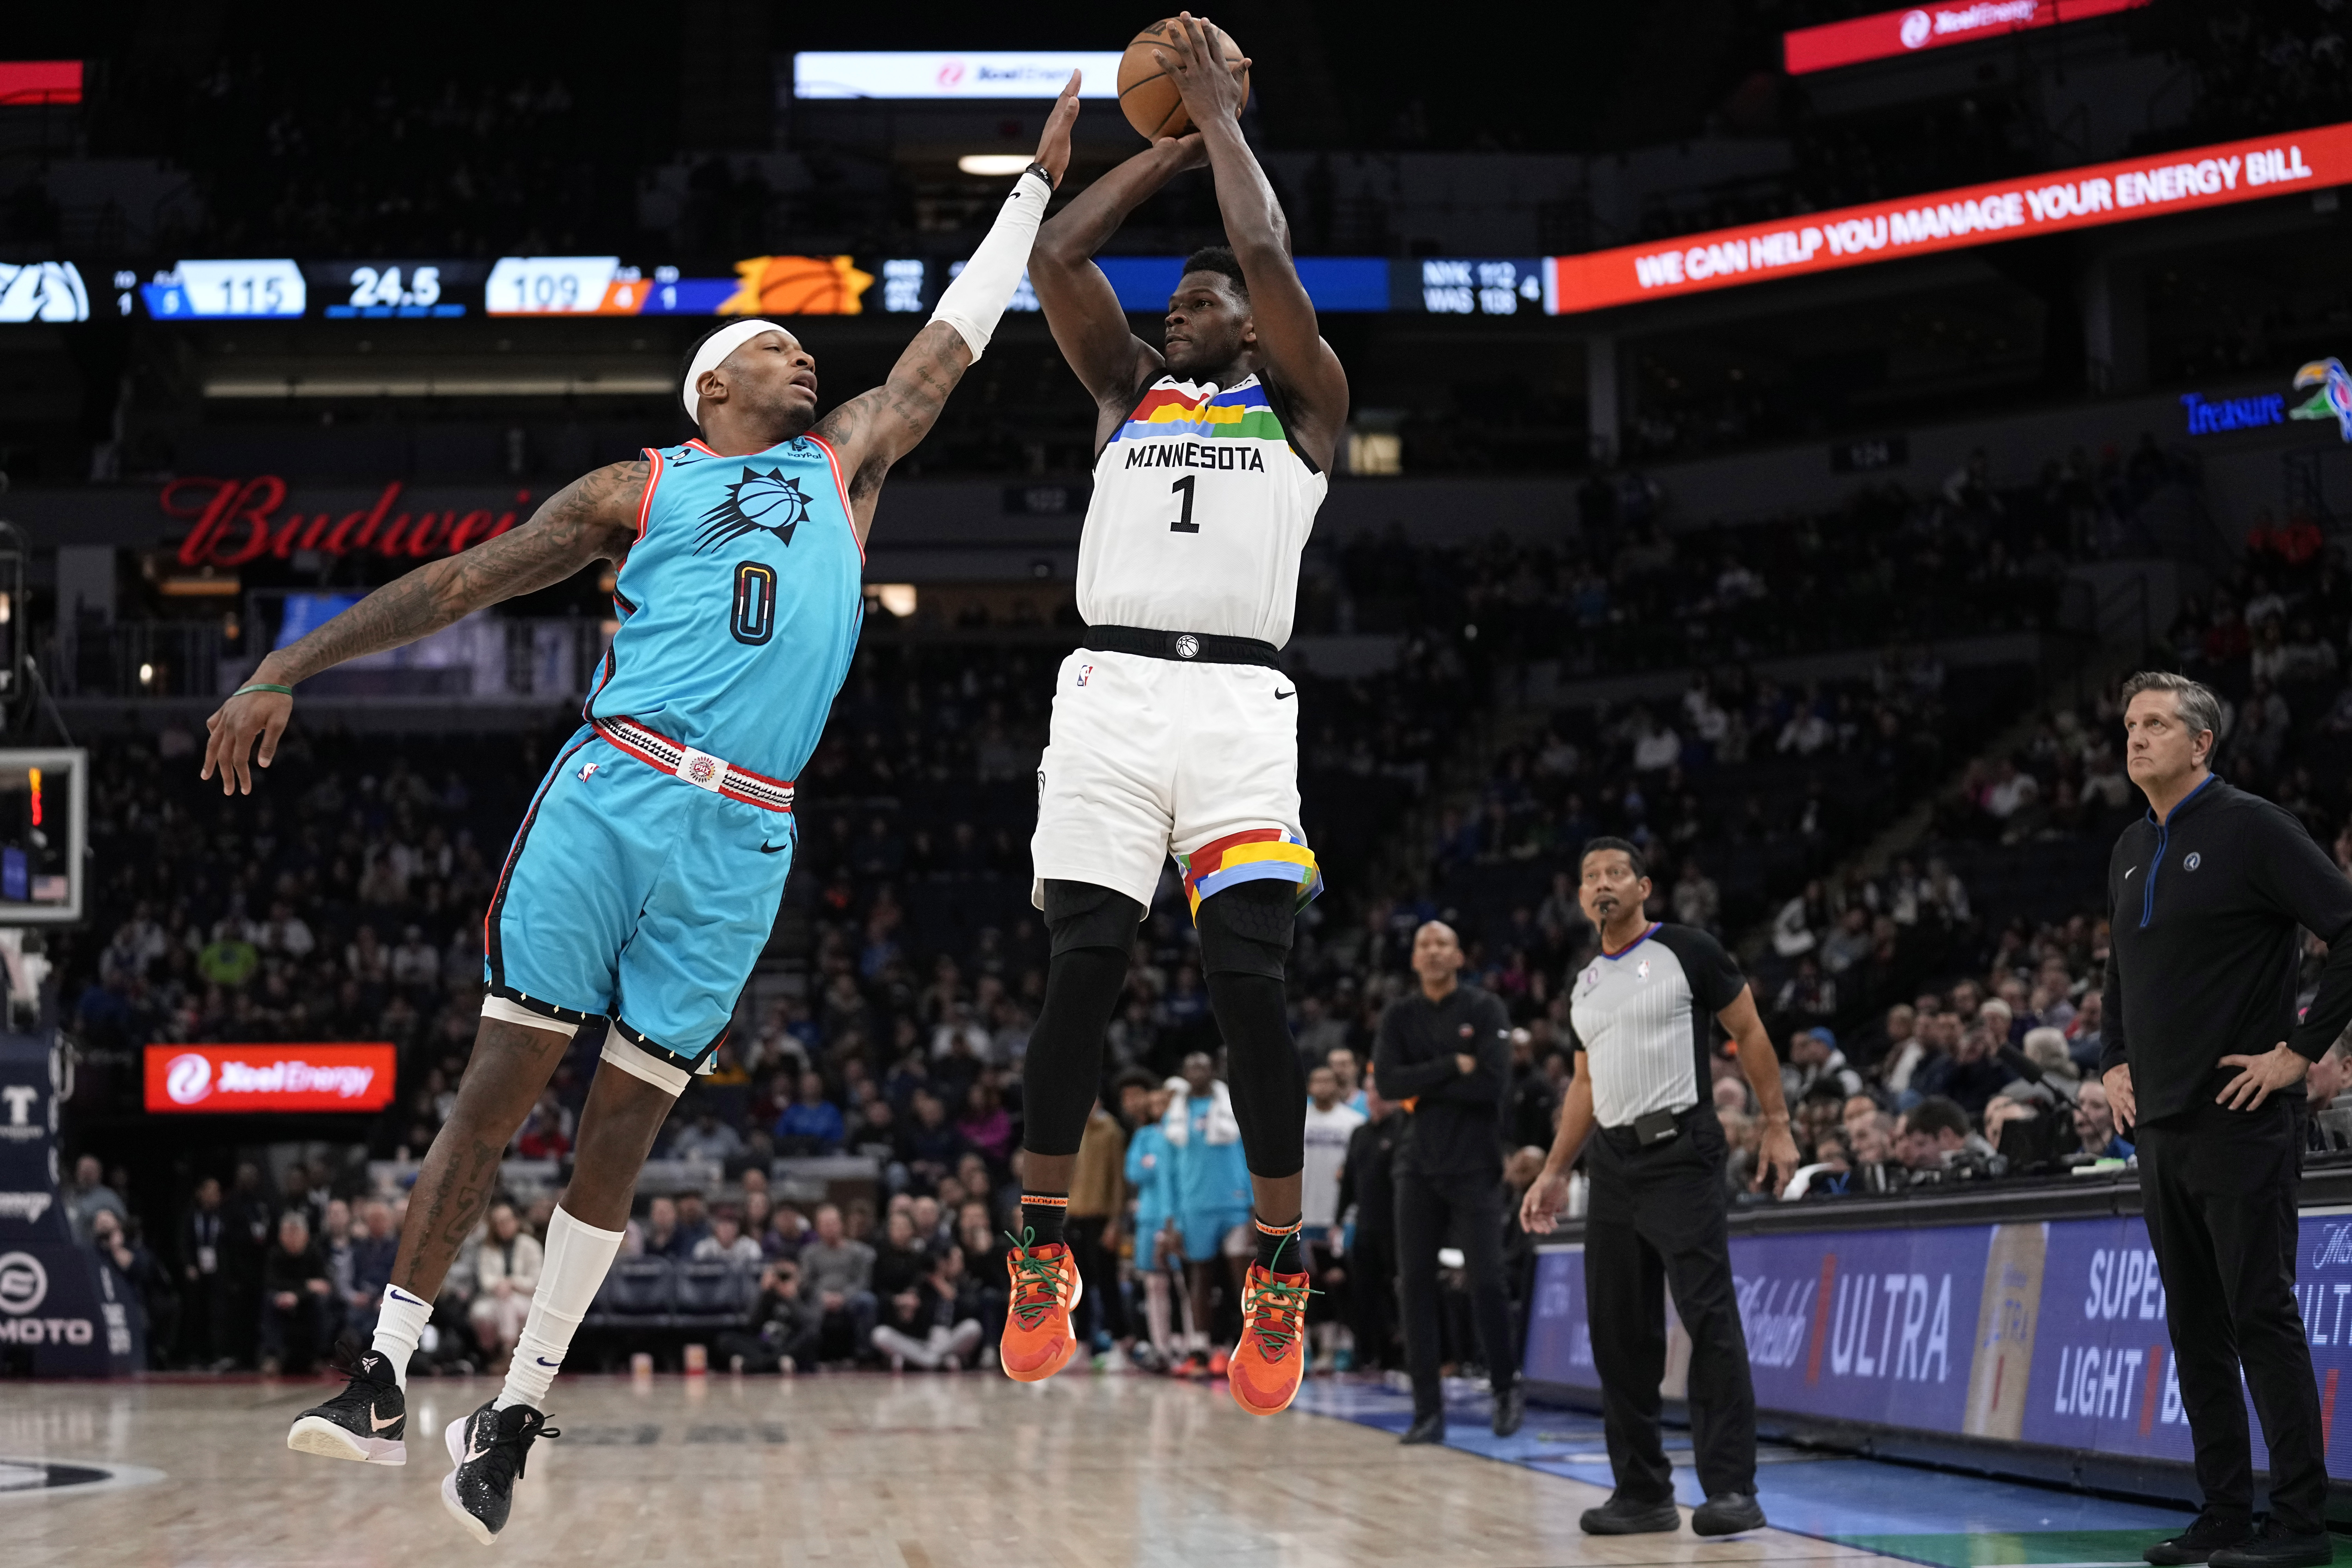 Anthony Edwards (1) of the Minnesota Timberwolves throws a shot in front of the mark of Torrey Craig (0) of the Phoenix Suns in the second half of an NBA game in Minneapolis, Friday, January 13, 2023. (AP Photo/Abbie Parr)